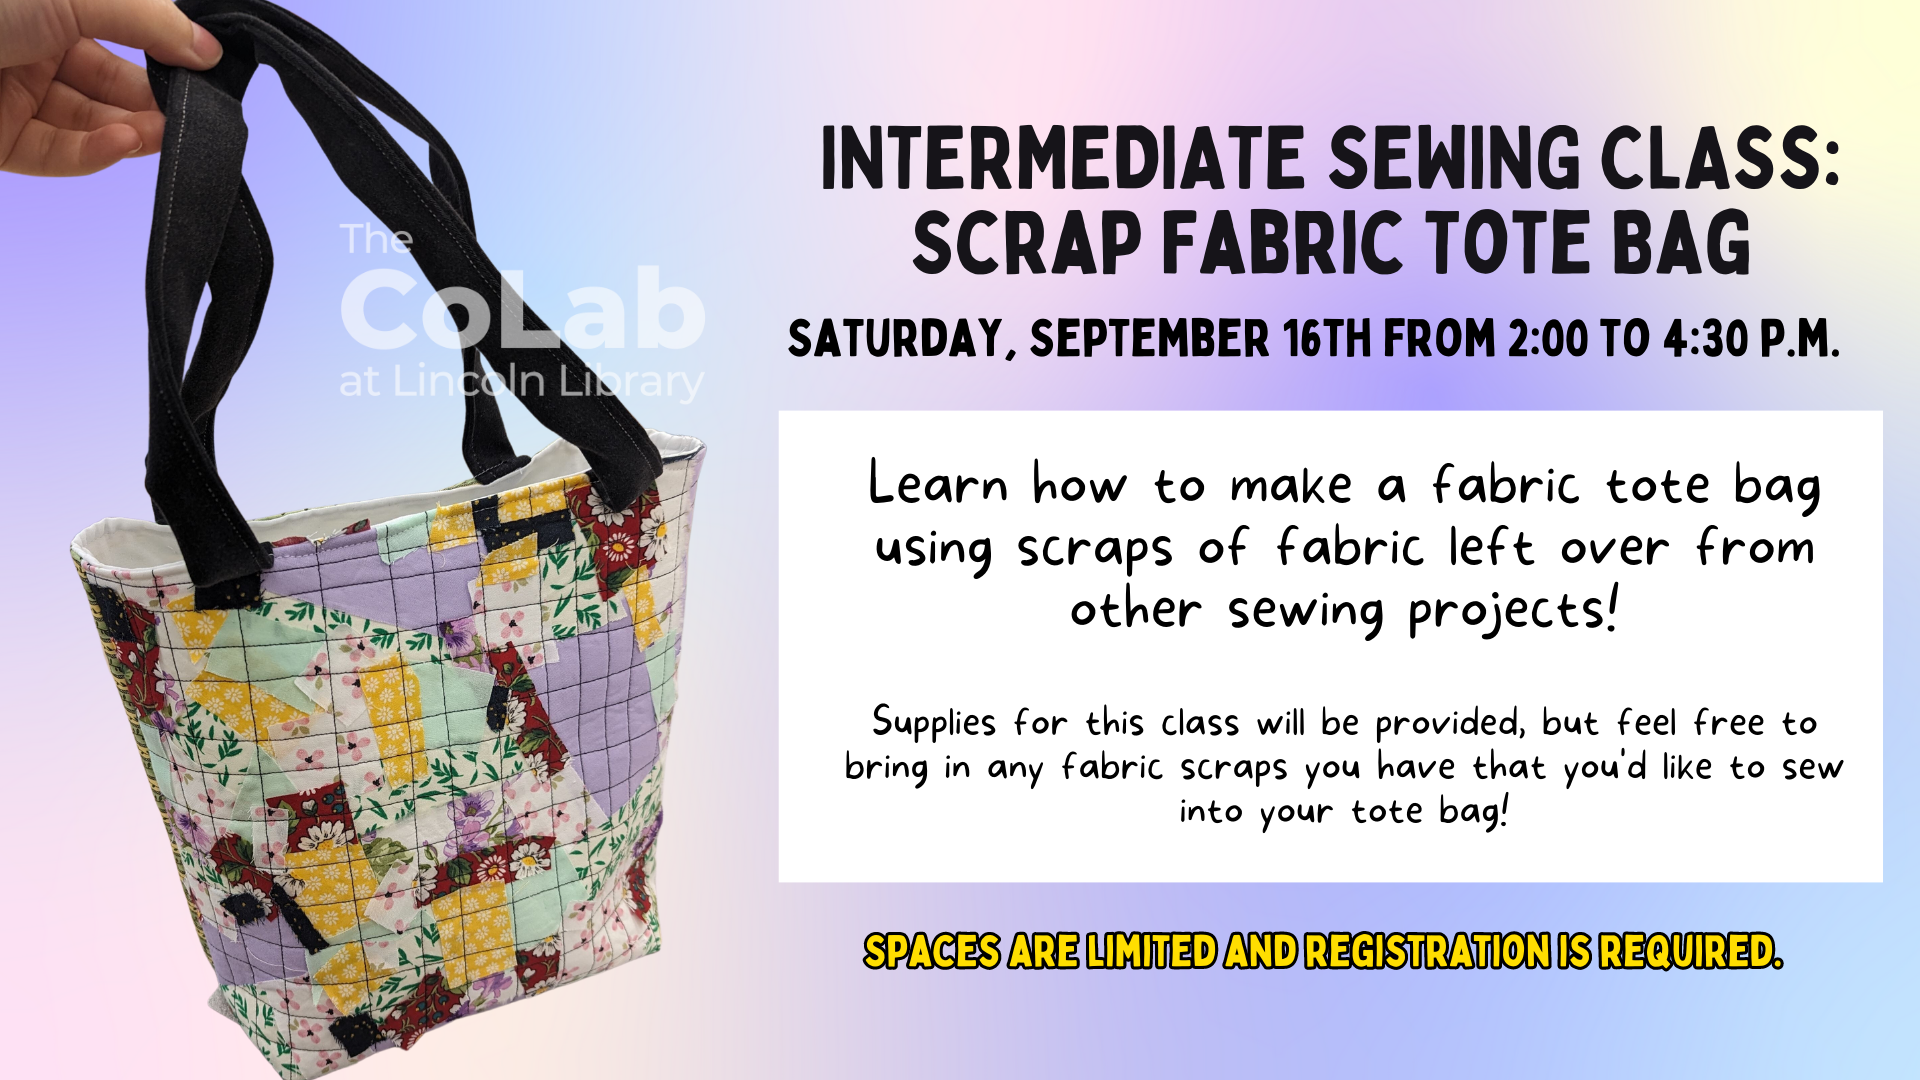 Promotional image for fabric scrap tote bag class, showing a quilted fabric tote bag